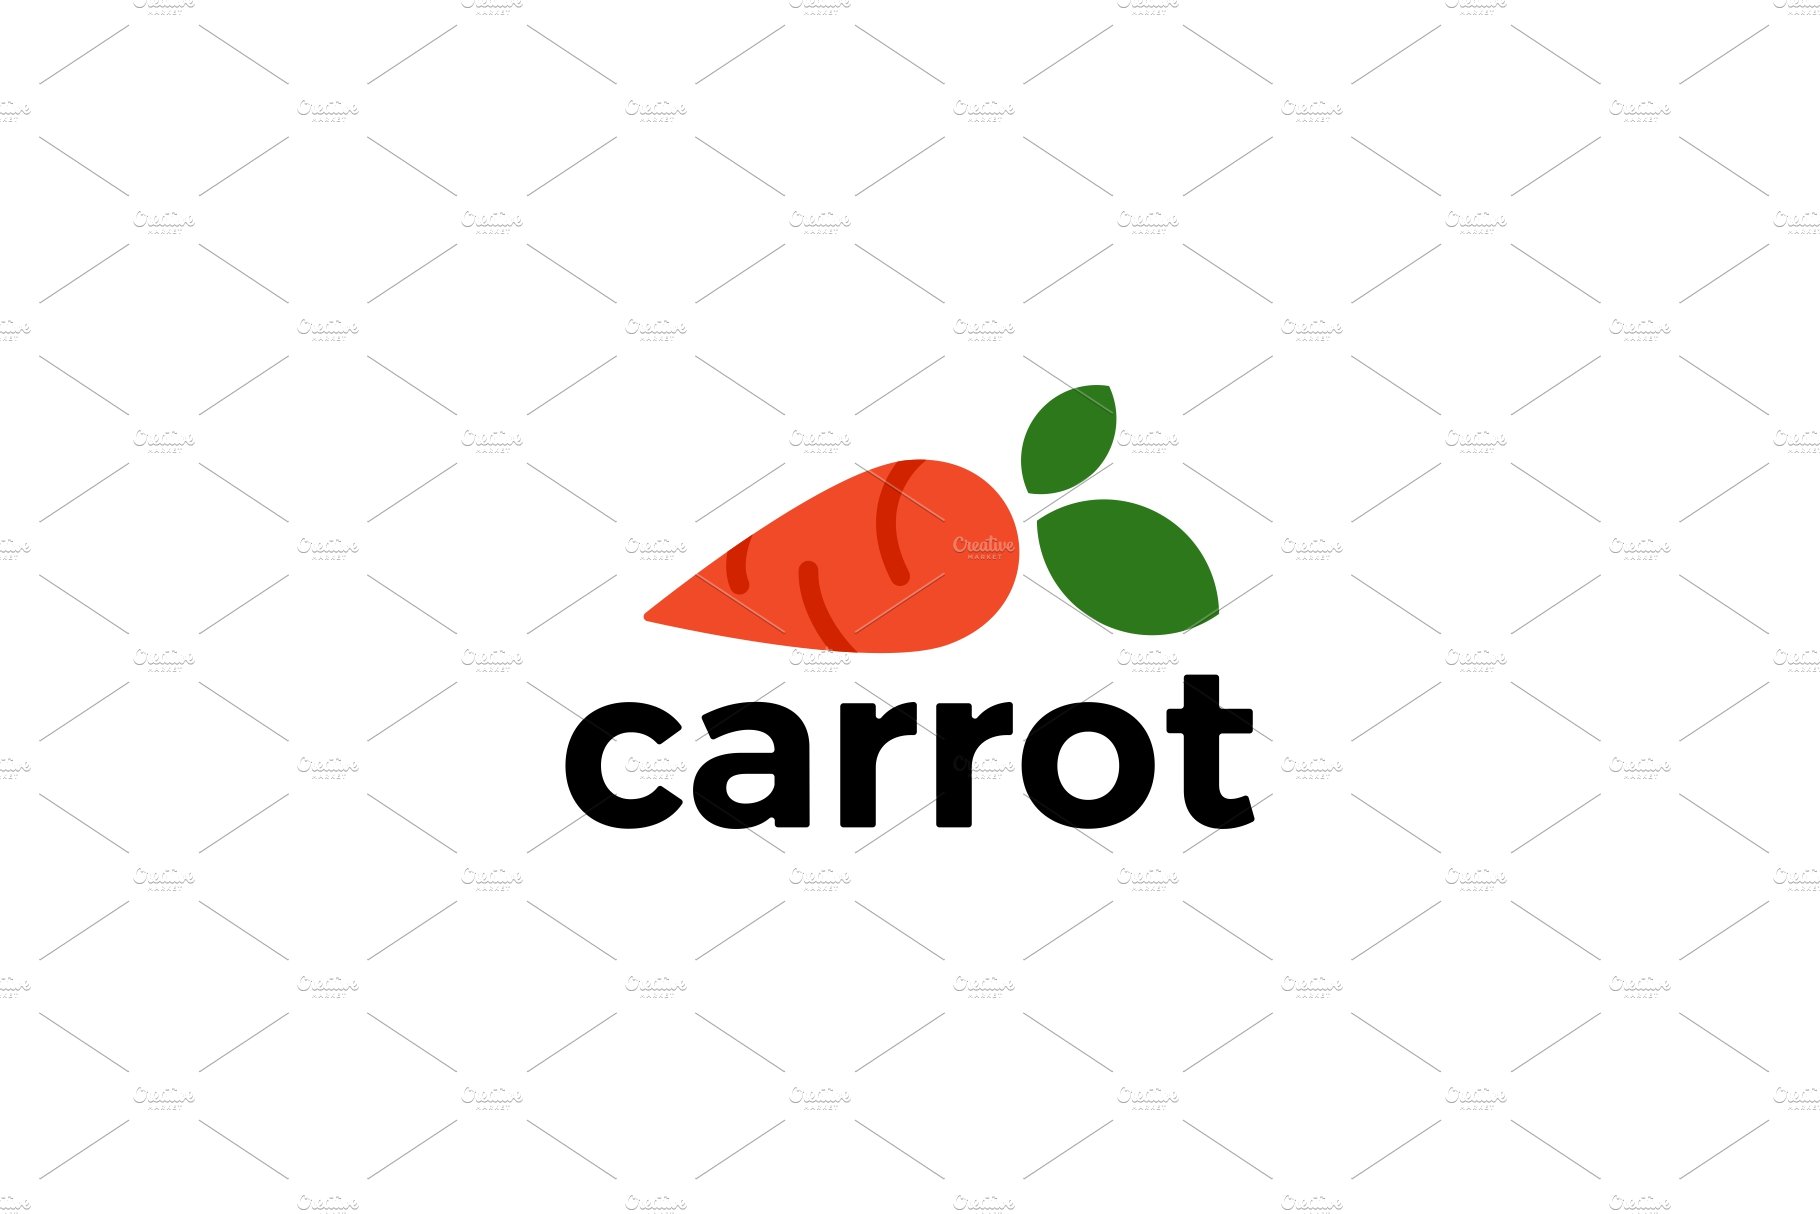 carrot logo vector icon illustration cover image.